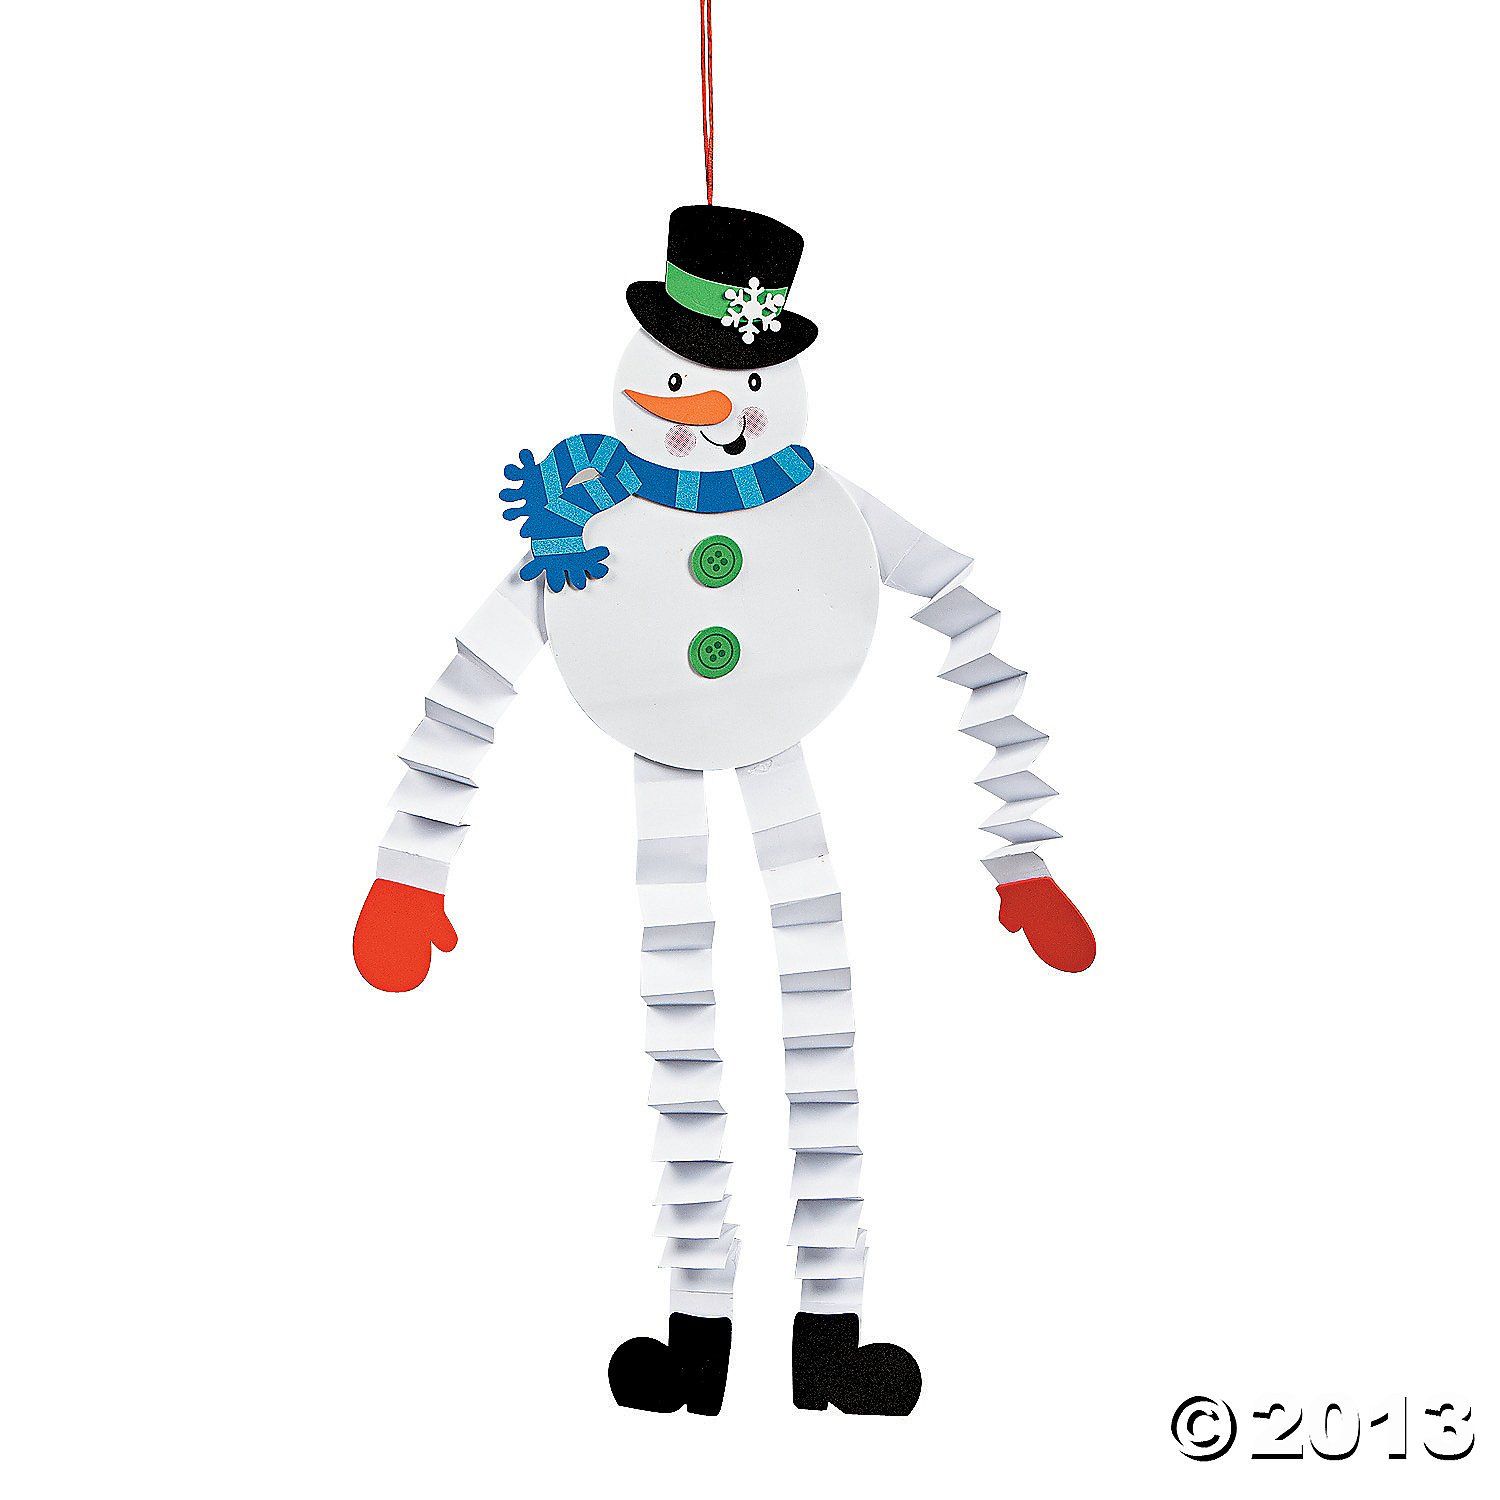 Paper made snowman with folded arm and legs